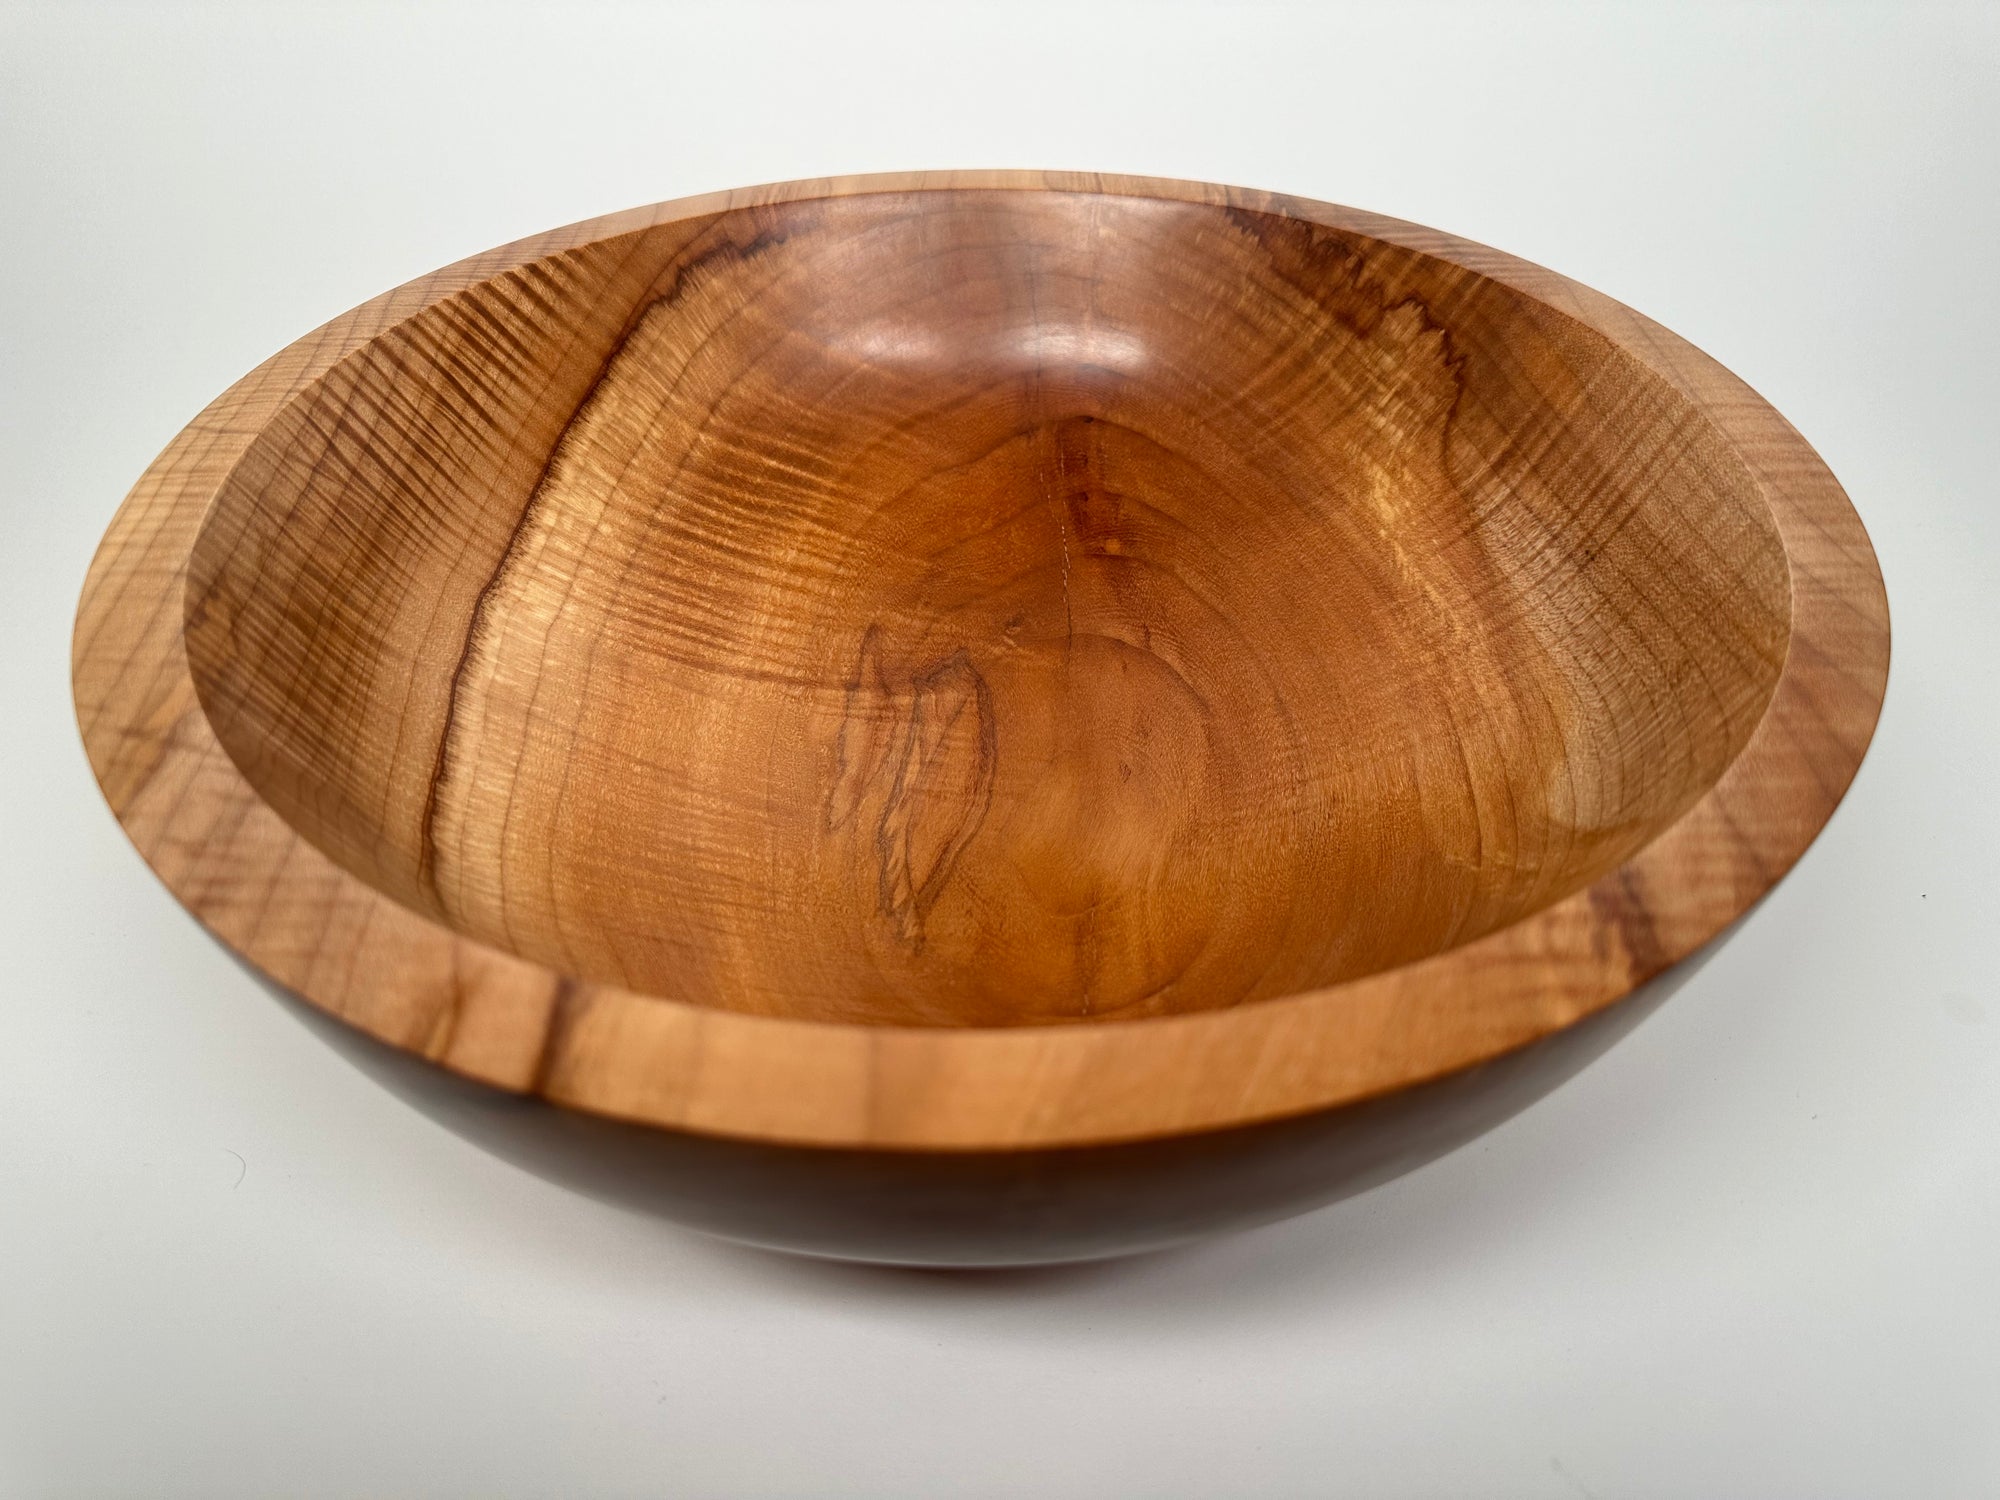 Spalted Flame Maple Bowl 13”